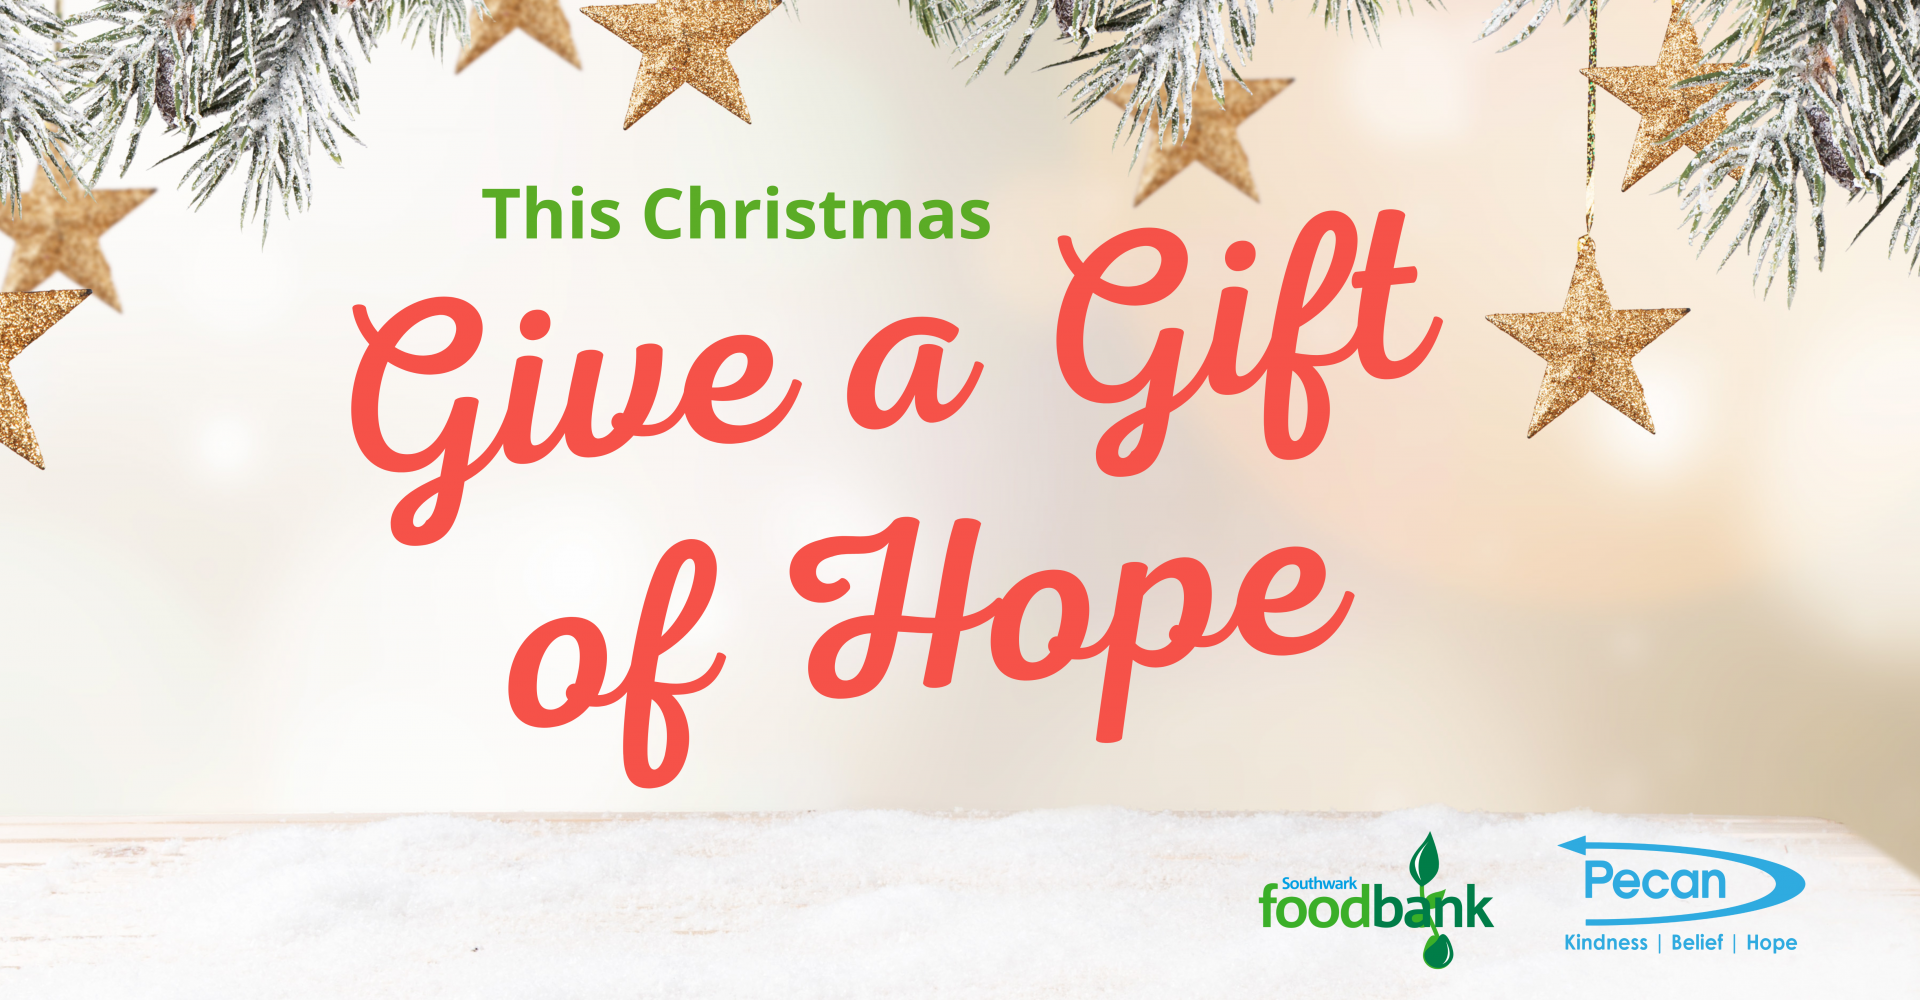 Christmas banner with stars and text This Christmas Give a Gift of Hope